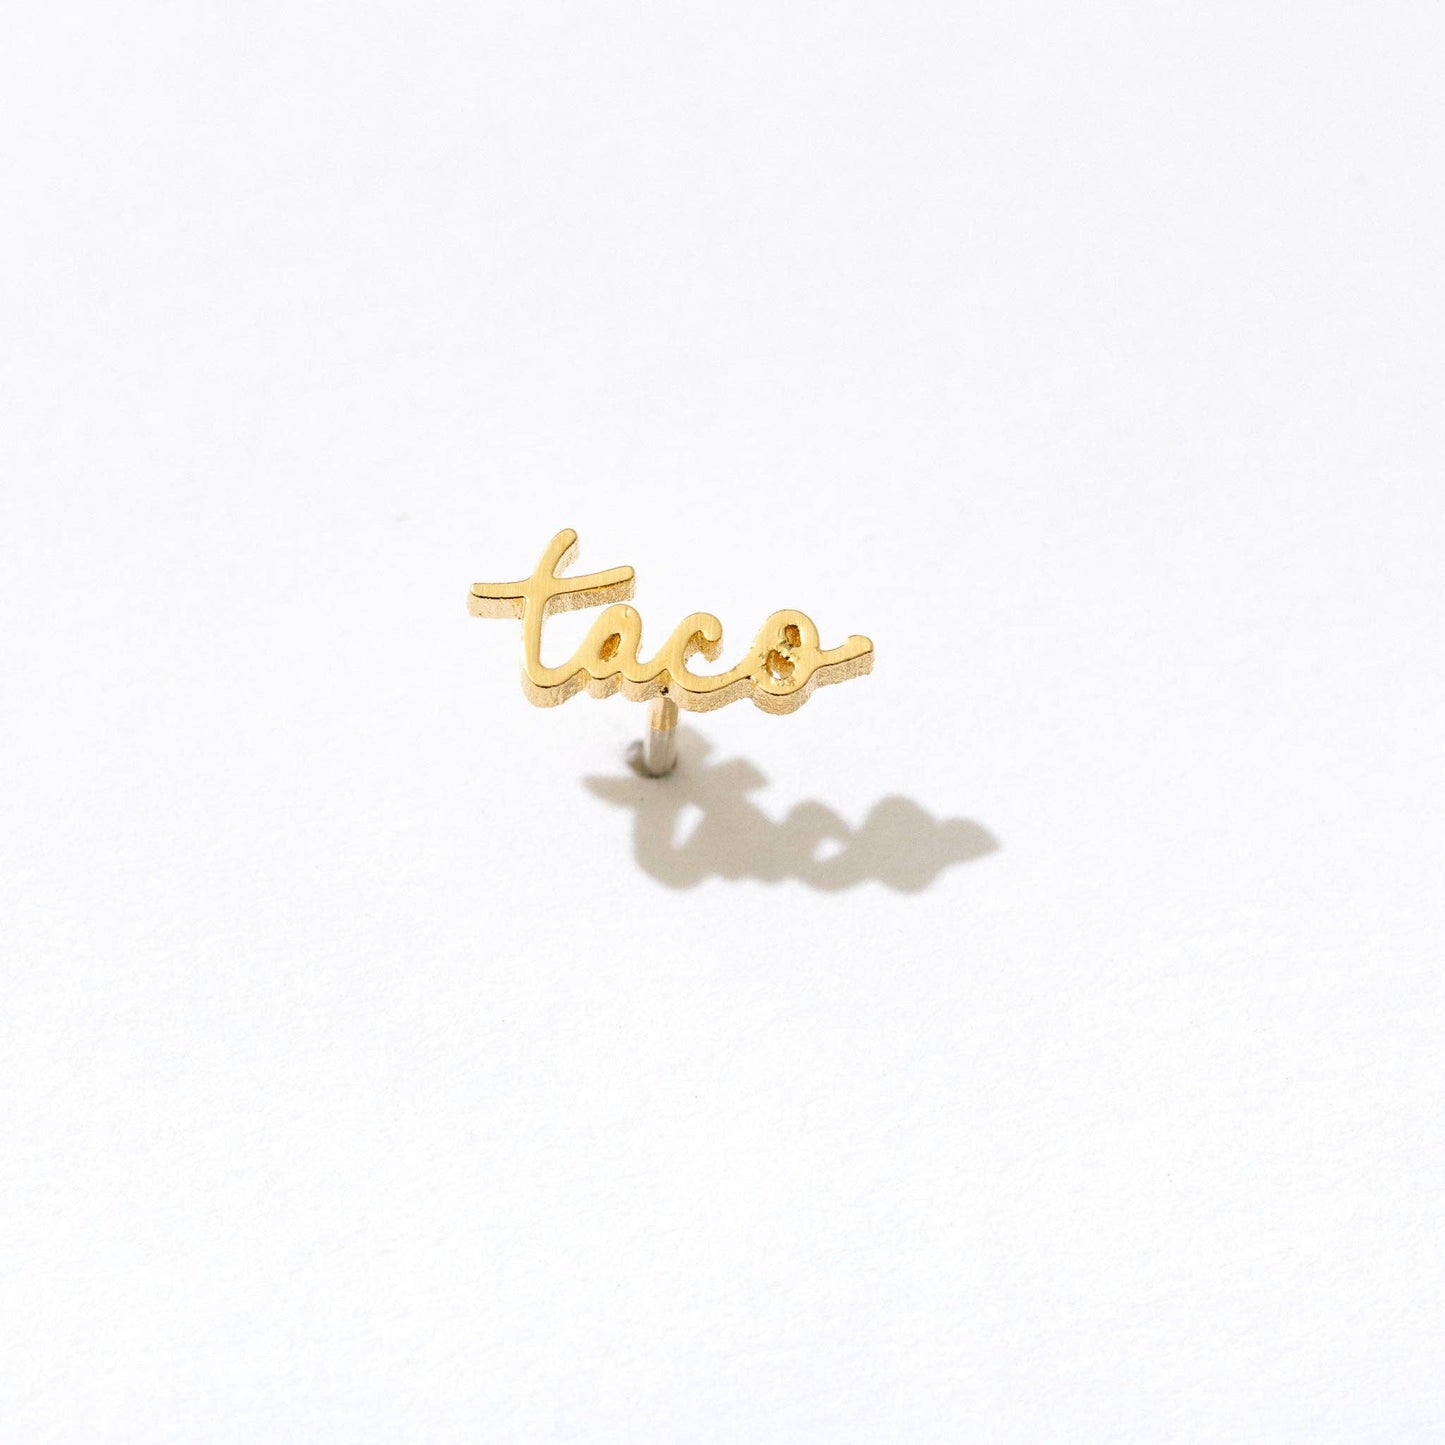 Single stud earring -- 14k gold plated text in script writing that reads "taco" 